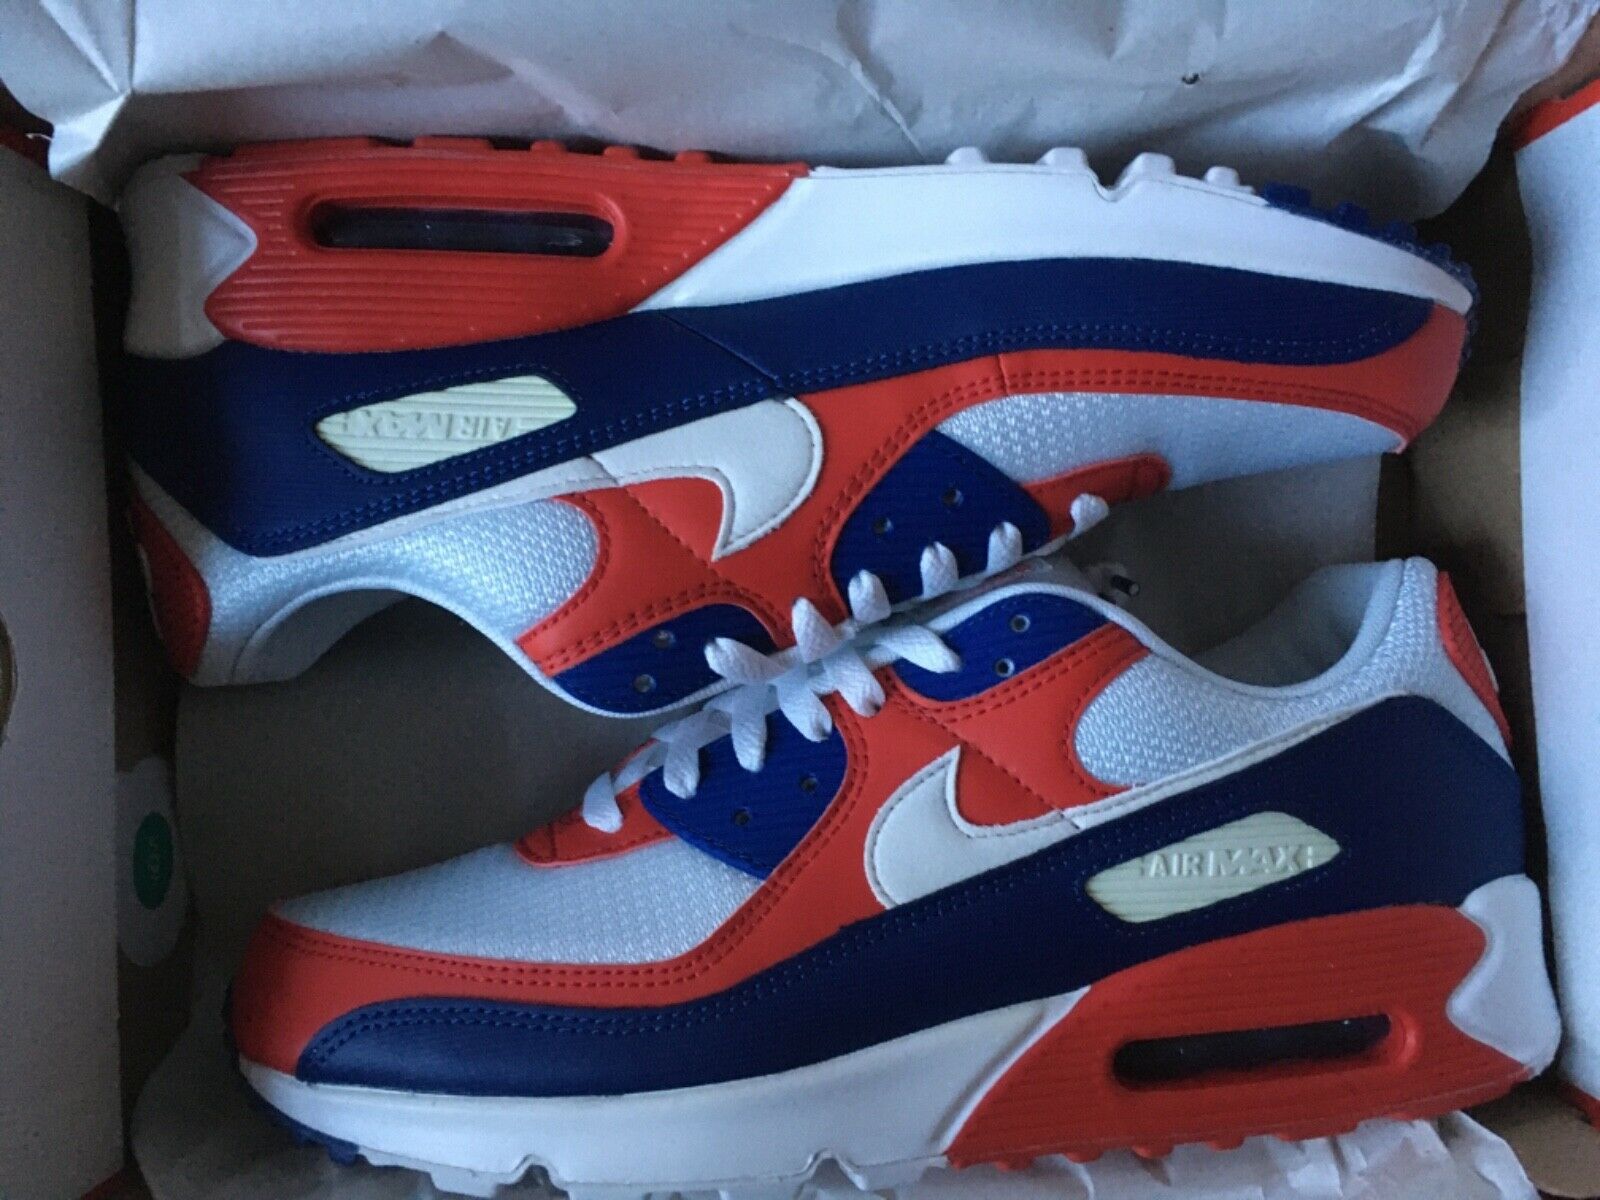 Sizes 11. Nike Air Max 90 Men Size Running Shoes USA White Red Blue